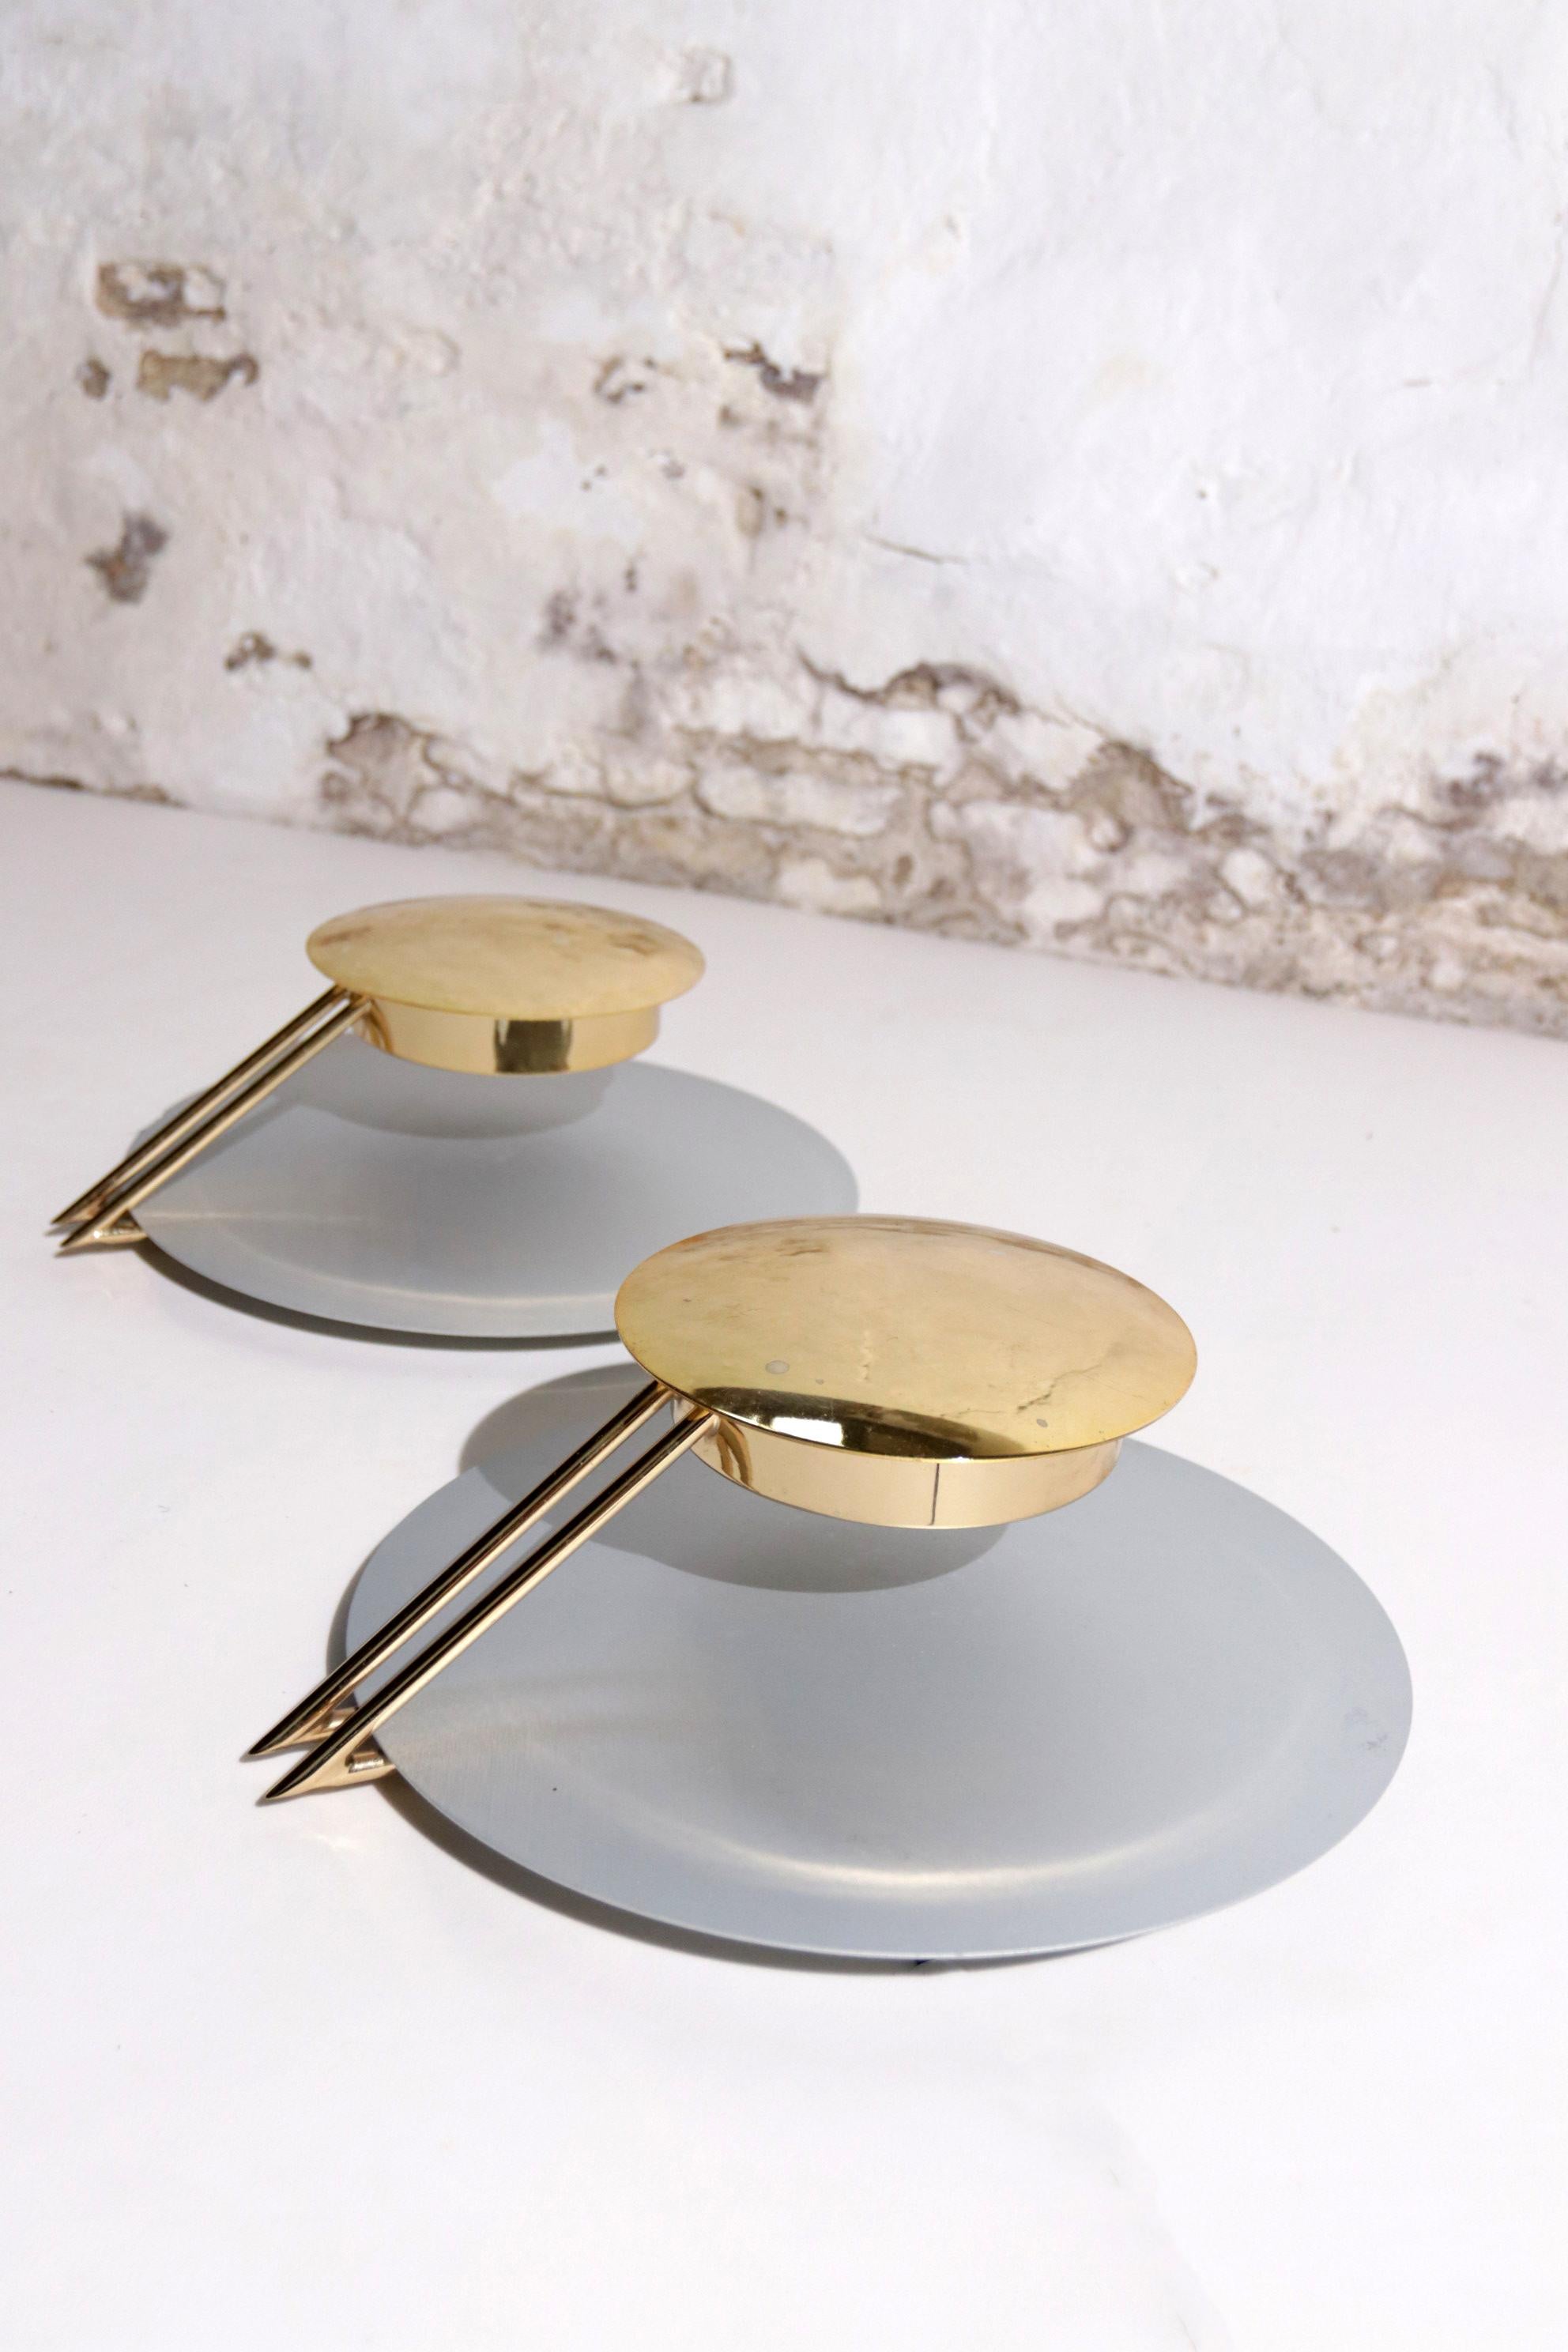 Two Memphis Style, Sleek design, wall lights or scones made by Tre Ci Luce Vega and designed by Luciano Cesaro & Fabio Amico 1985.
Silver metal round disc as back plate, brass arms and round brass top plate.

Tre Ci/Luce, literally translated as